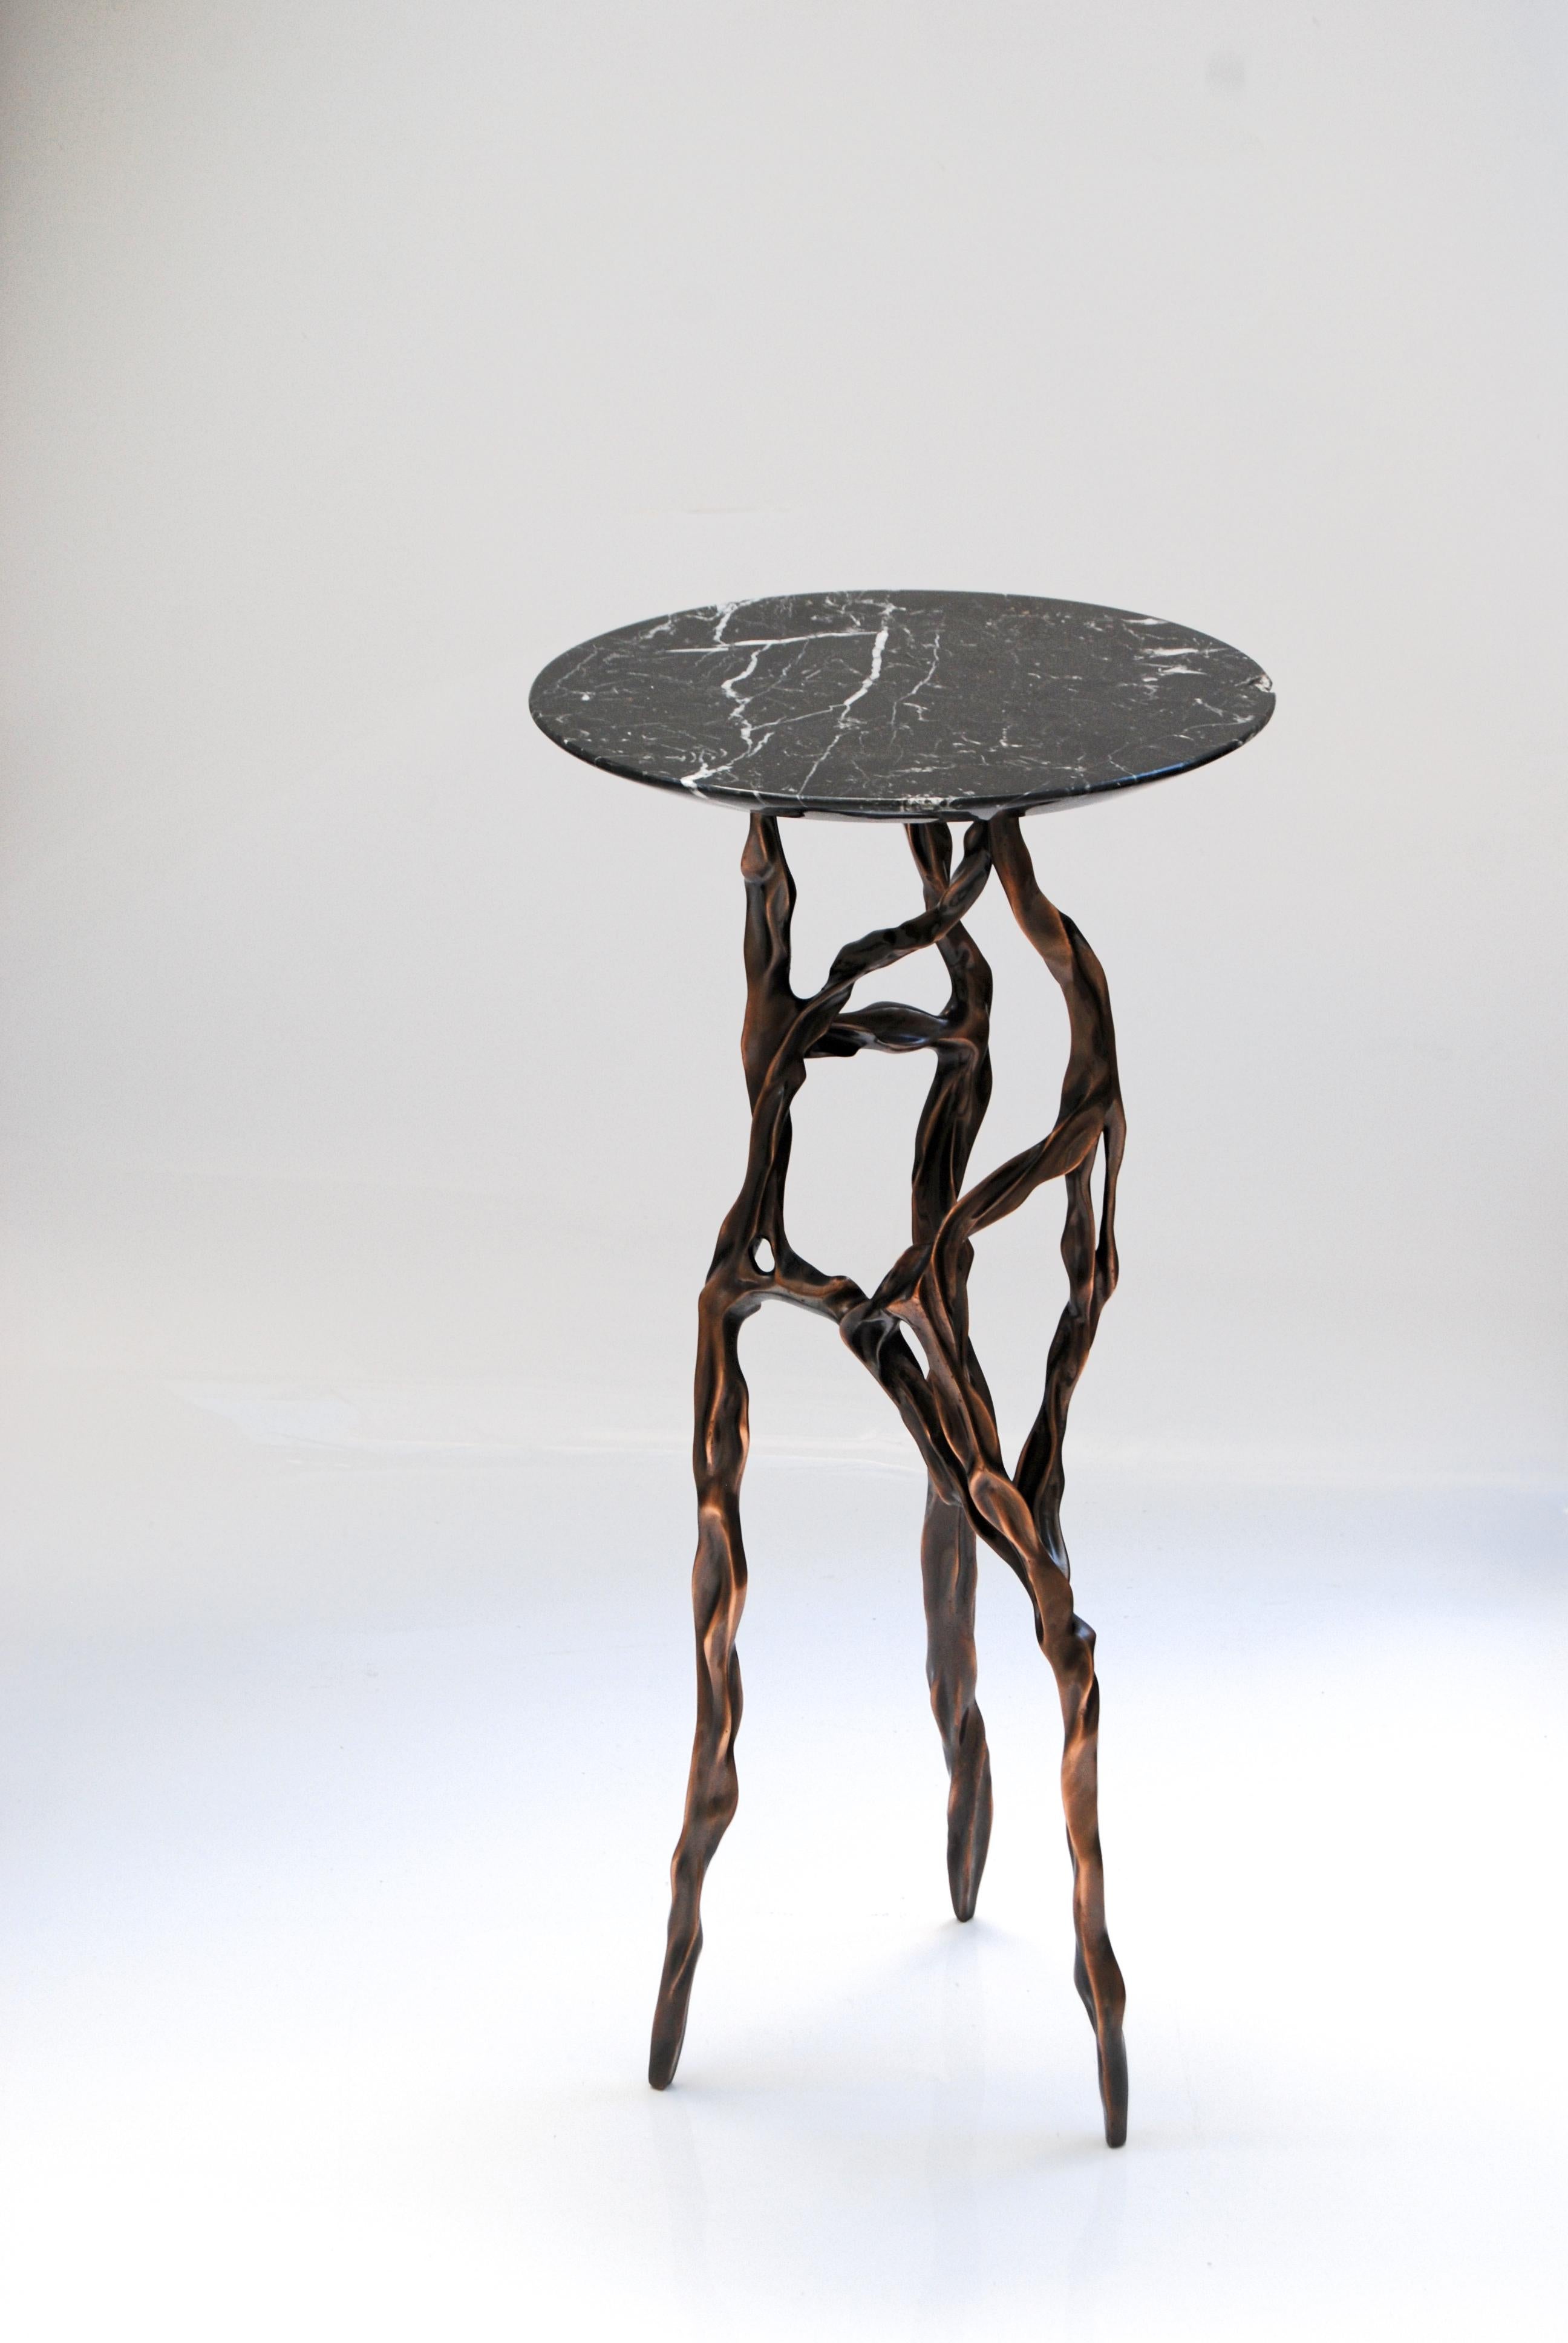 Brazilian Polished Bronze Side Table with Marquina Marble Top by FAKASAKA Design